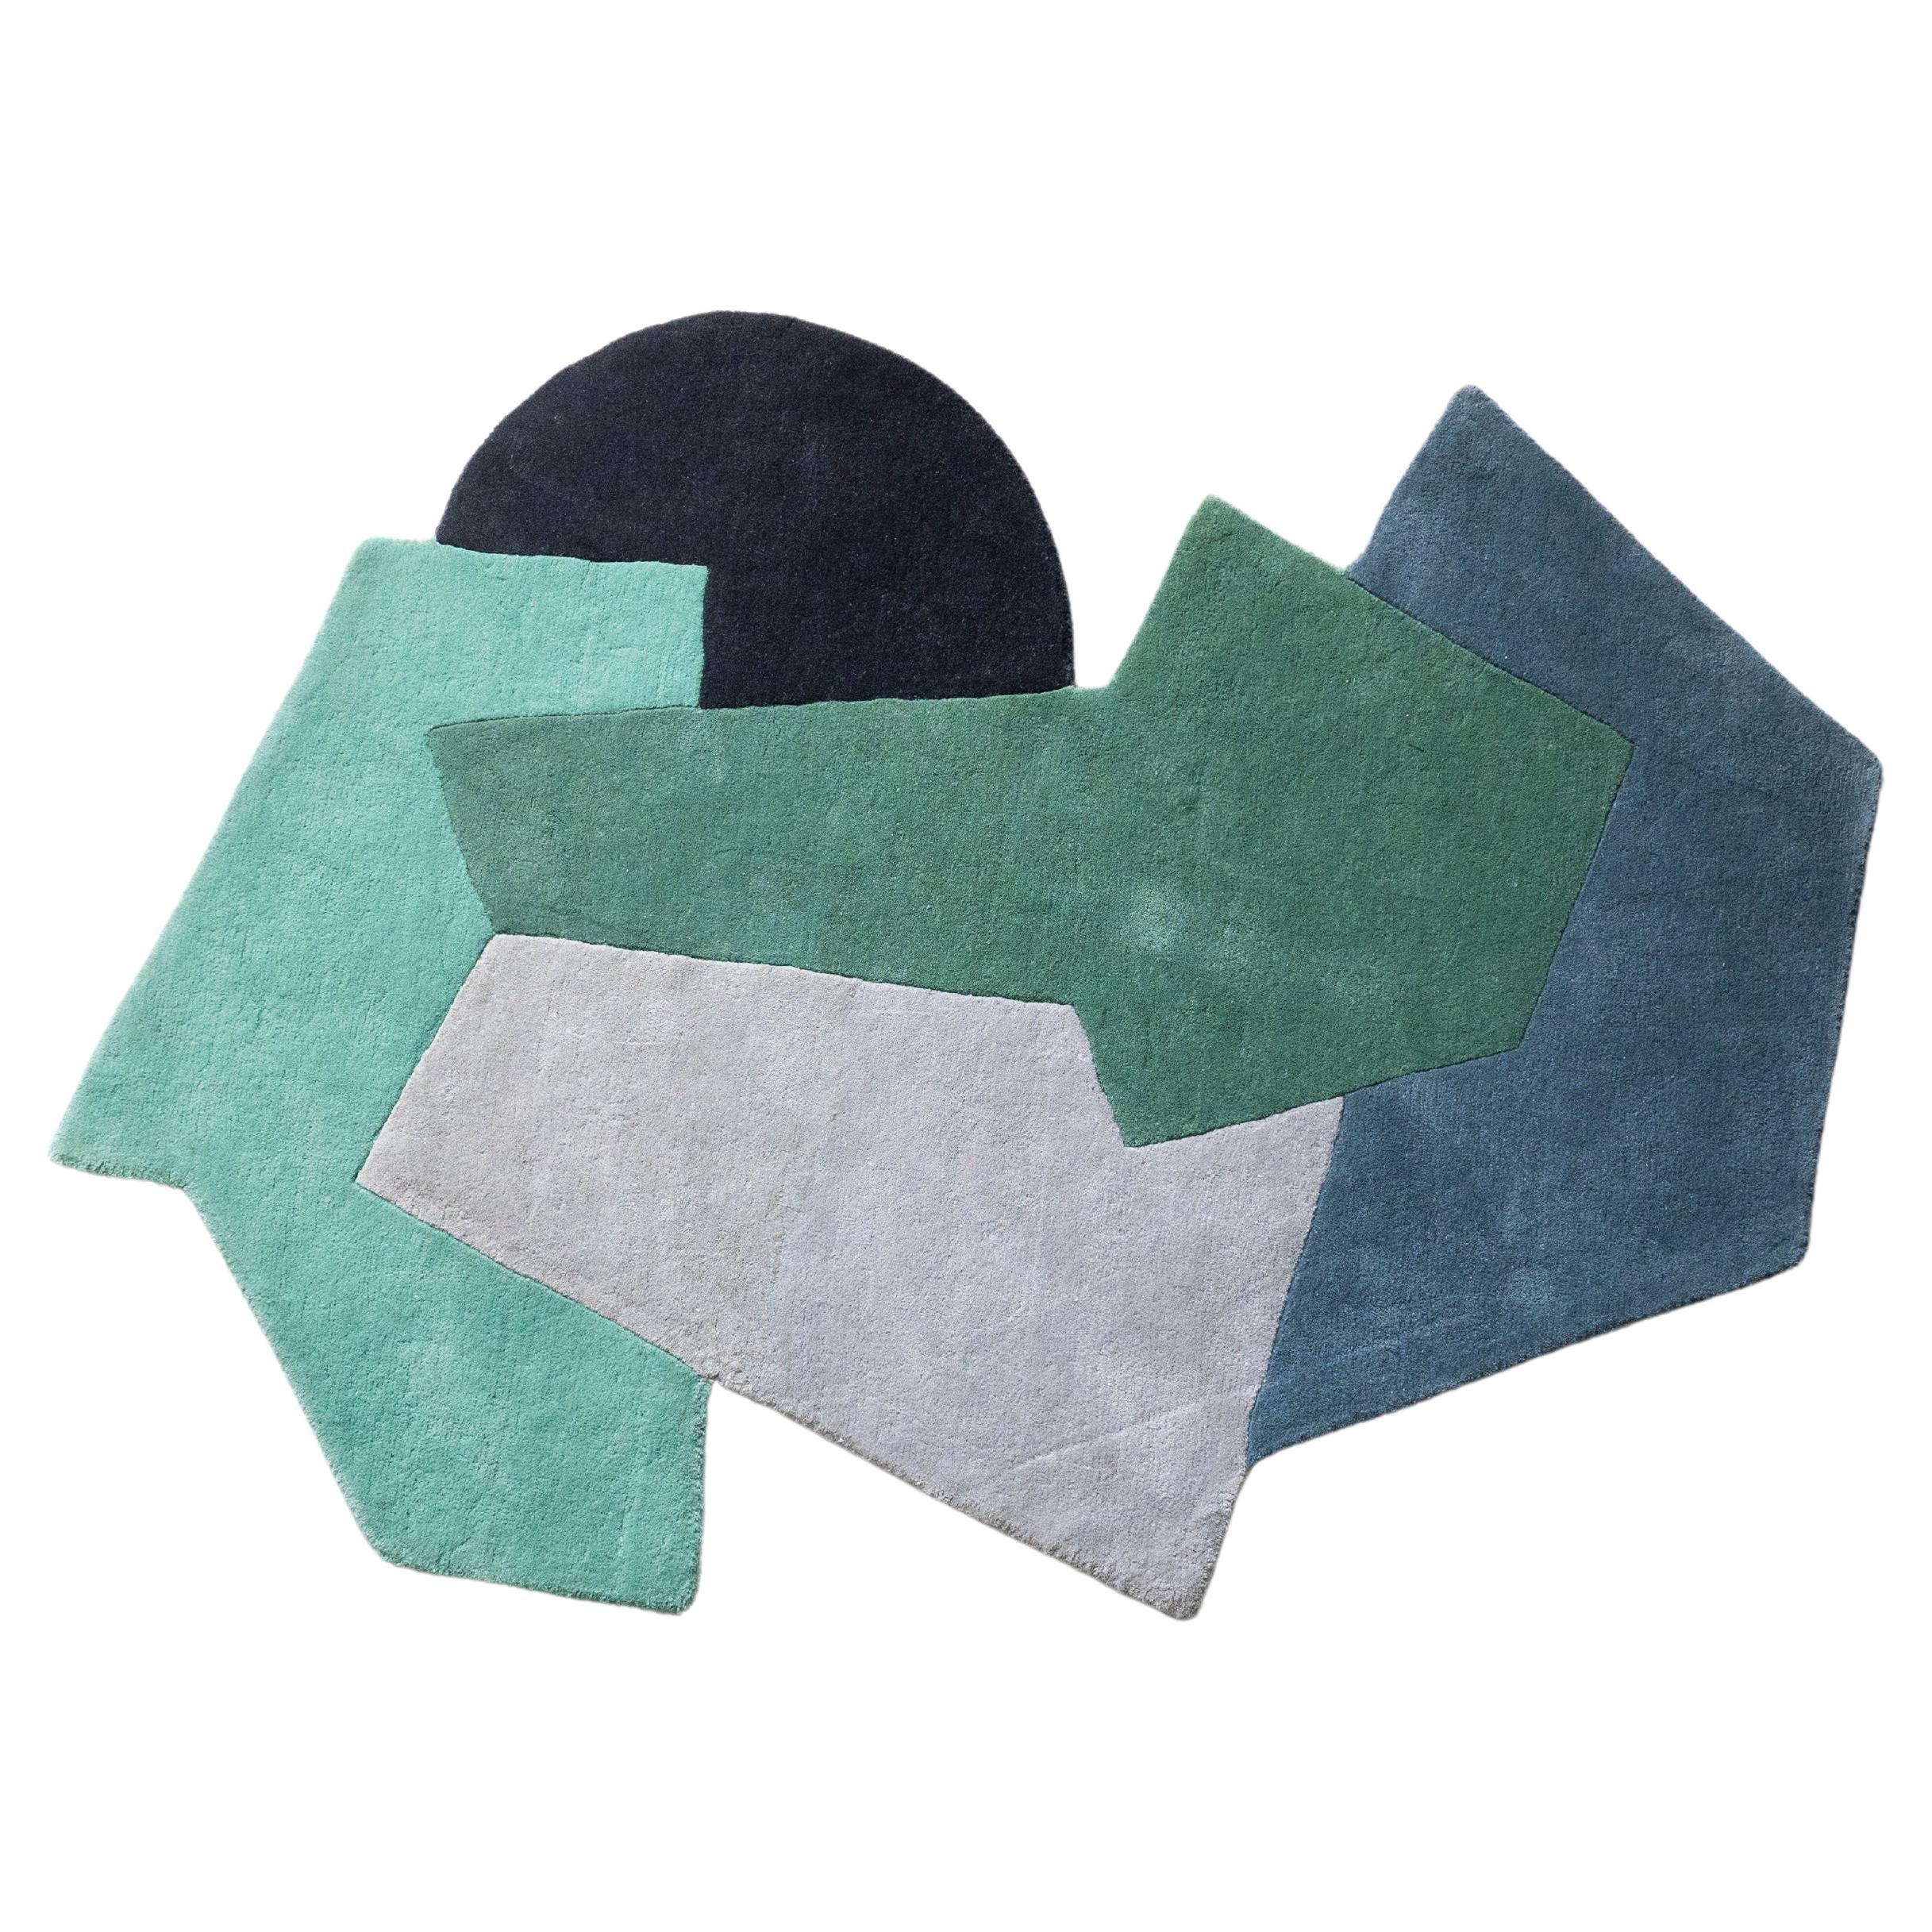 21st Century Contemporary Colorful Geometric Rug, Hand Tufted Wool, Green Tones For Sale